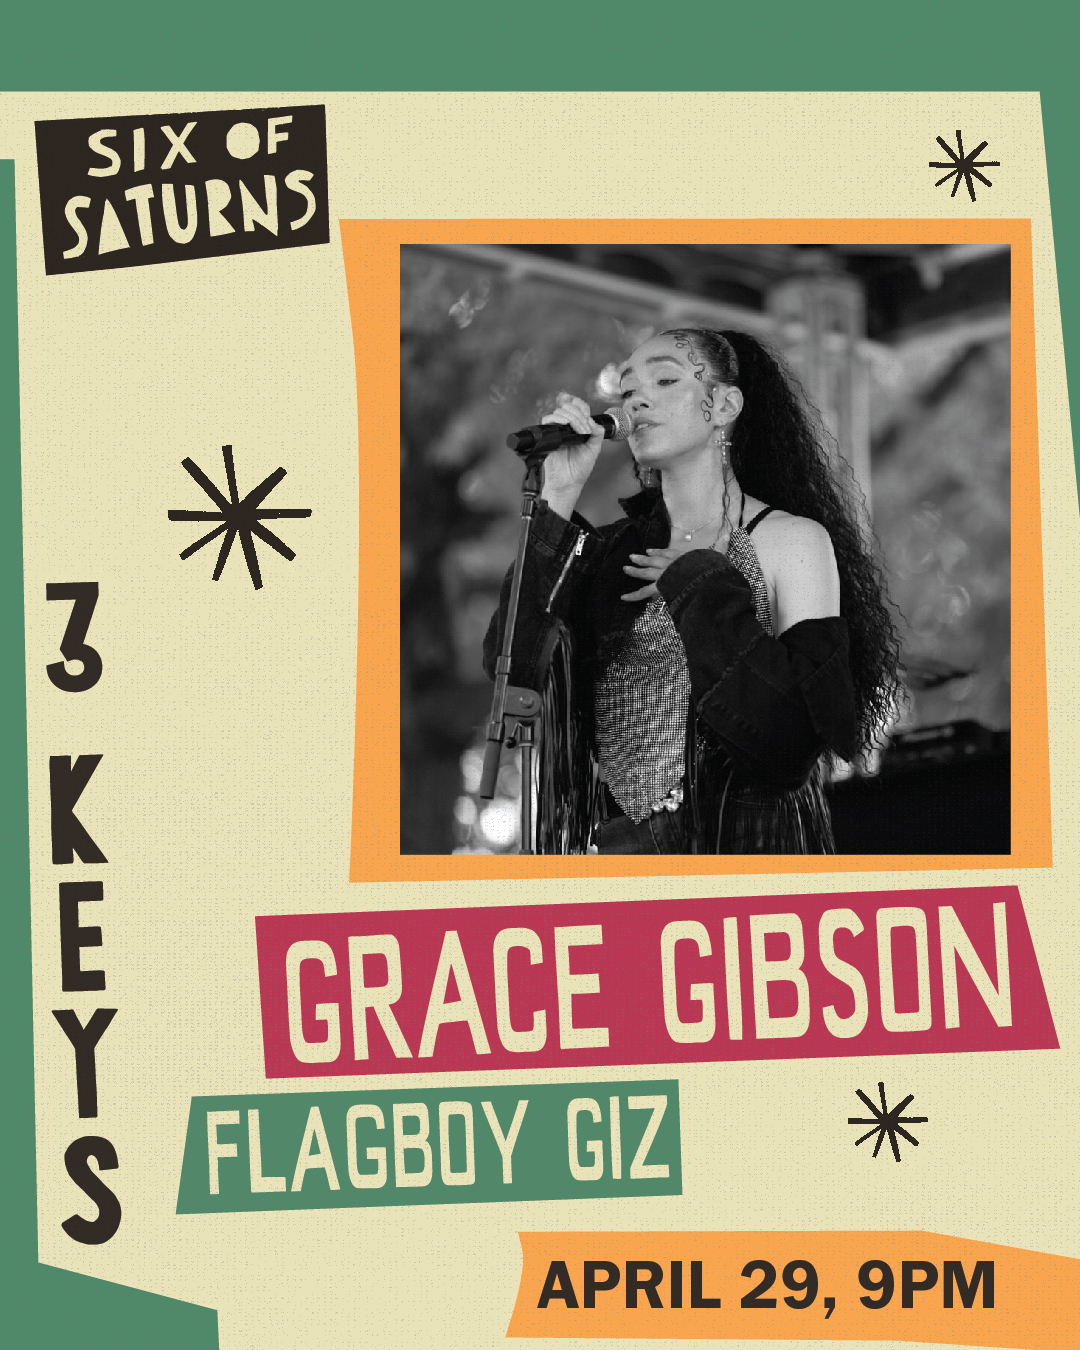 Six of Saturns: Grace Gibson promo